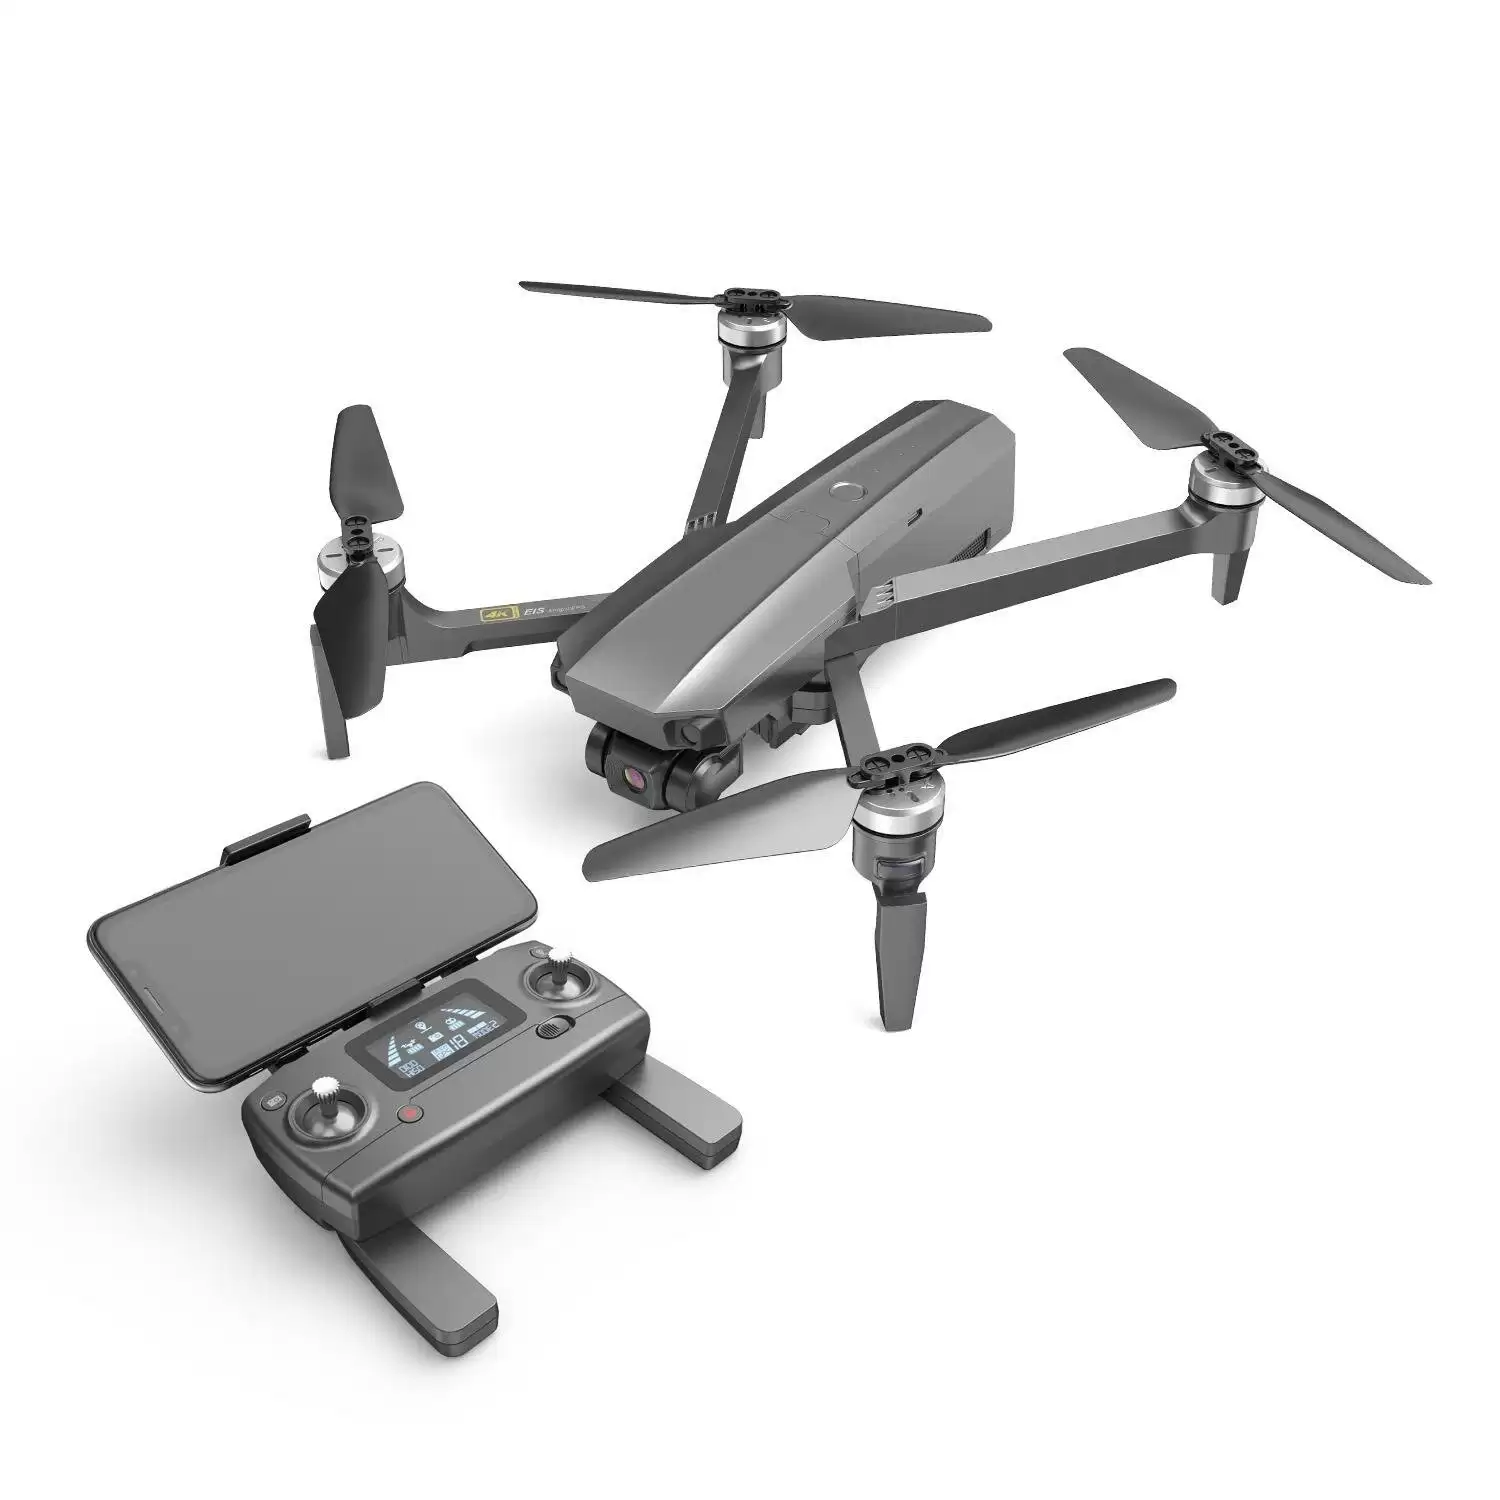 Order In Just $222.49 Mjx Bugs 16 Pro B16 Pro Eis 5g Wifi Fpv With 3-axis Coreless Gimbal 50x Zoom 4k Eis Camera 28mins Flight Time Gps Rc Drone Quadcopter Rtf With This Coupon At Banggood